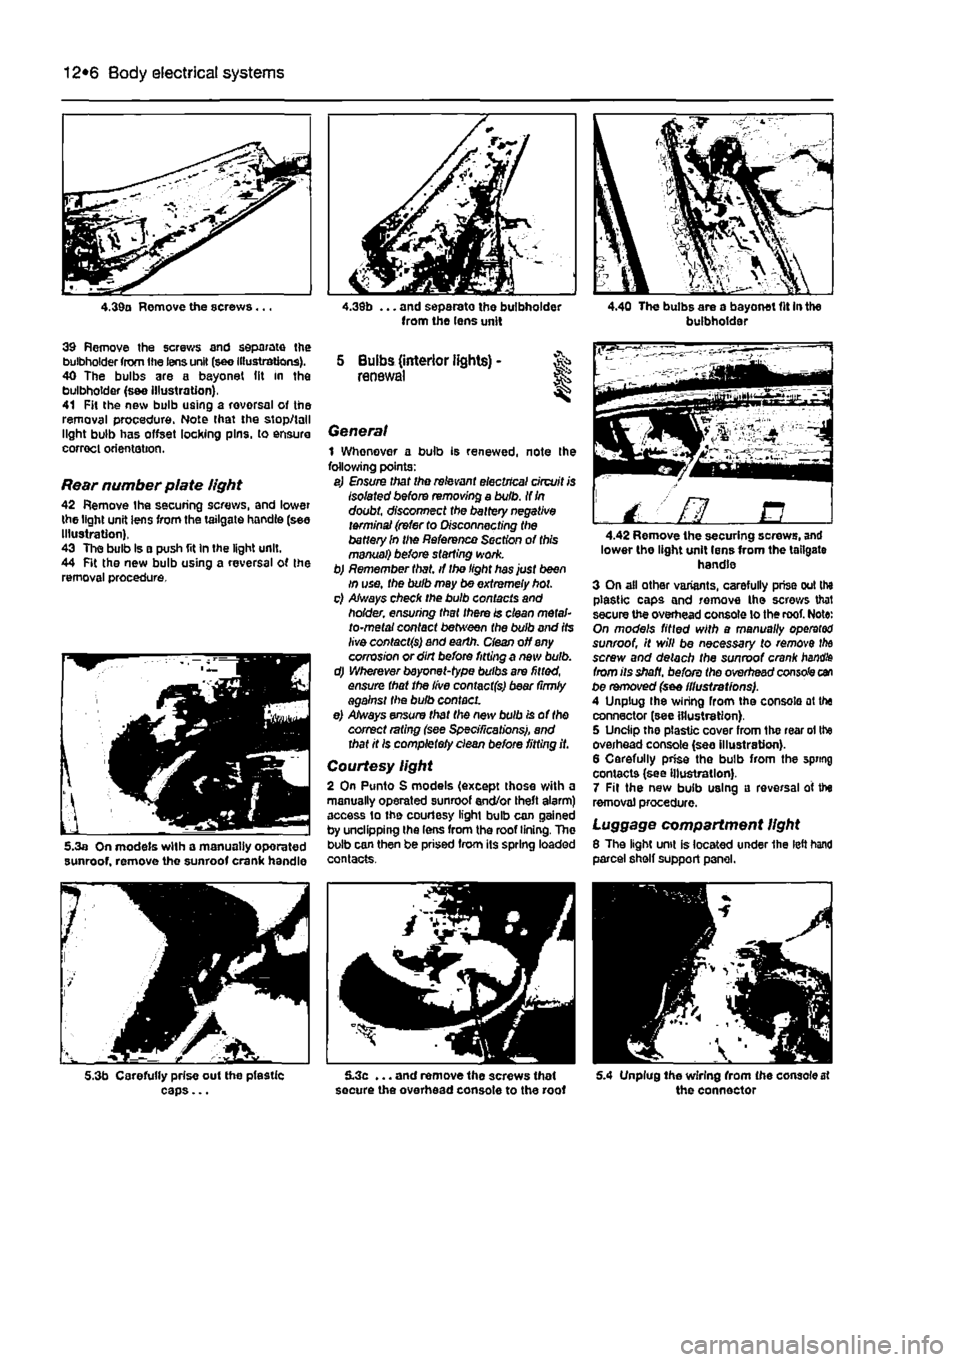 FIAT PUNTO 1997 176 / 1.G Workshop Manual 
12*6 Body electrical systems 
4.39a Remove the screws... 
39 Remove the screws and separate the bulbholder from the lens unit (see Illustrations). 40 The bulbs are a bayonet (it in the bulbholder (s&